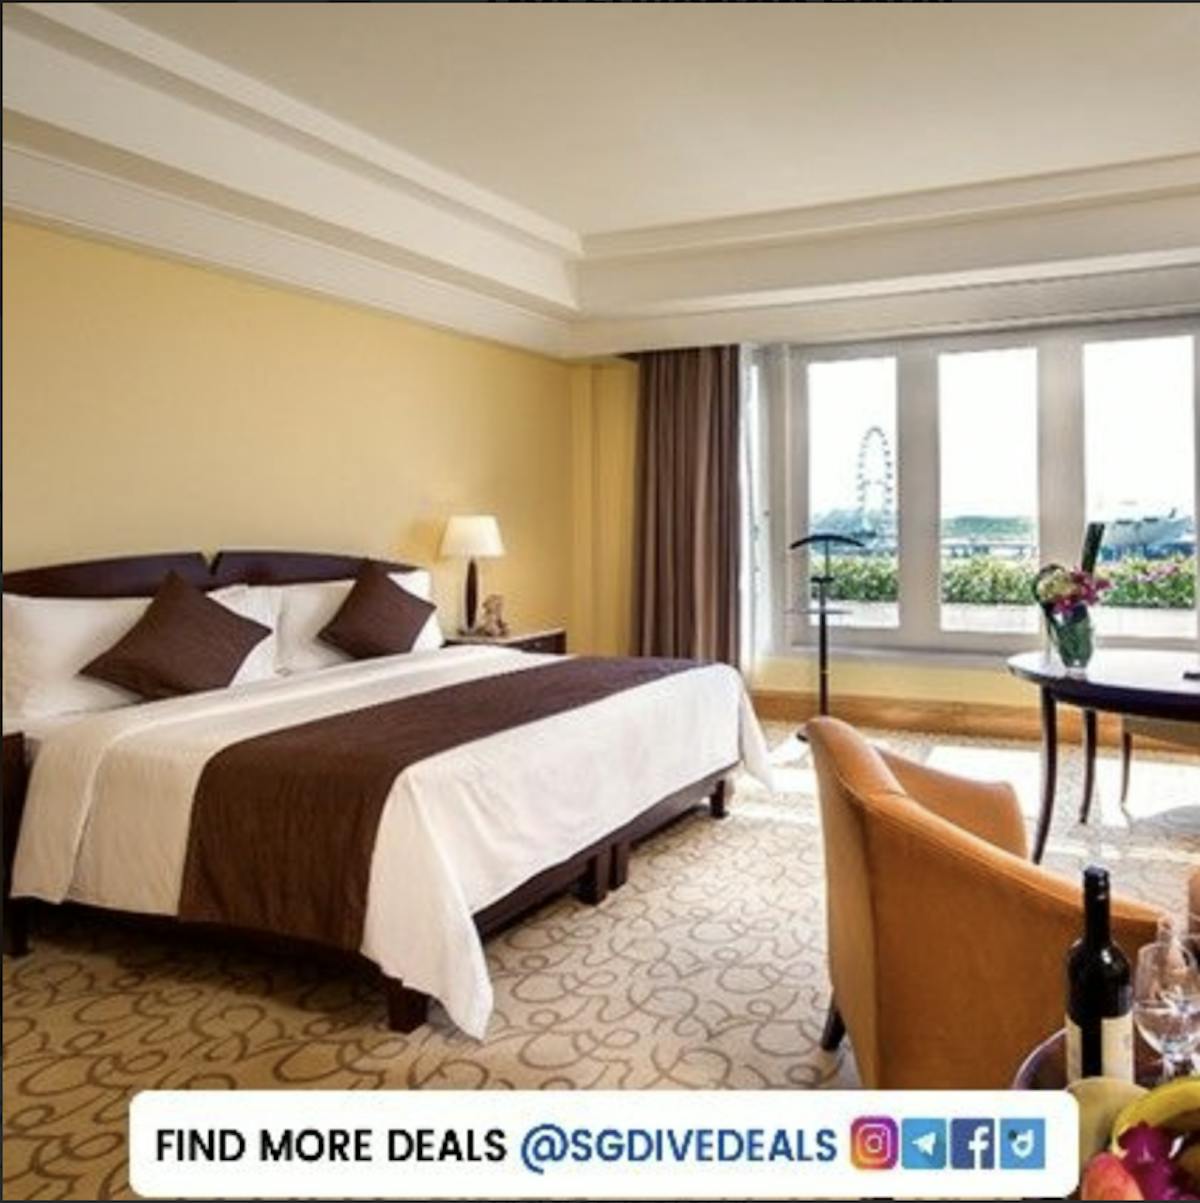 1-1 night stay promotion